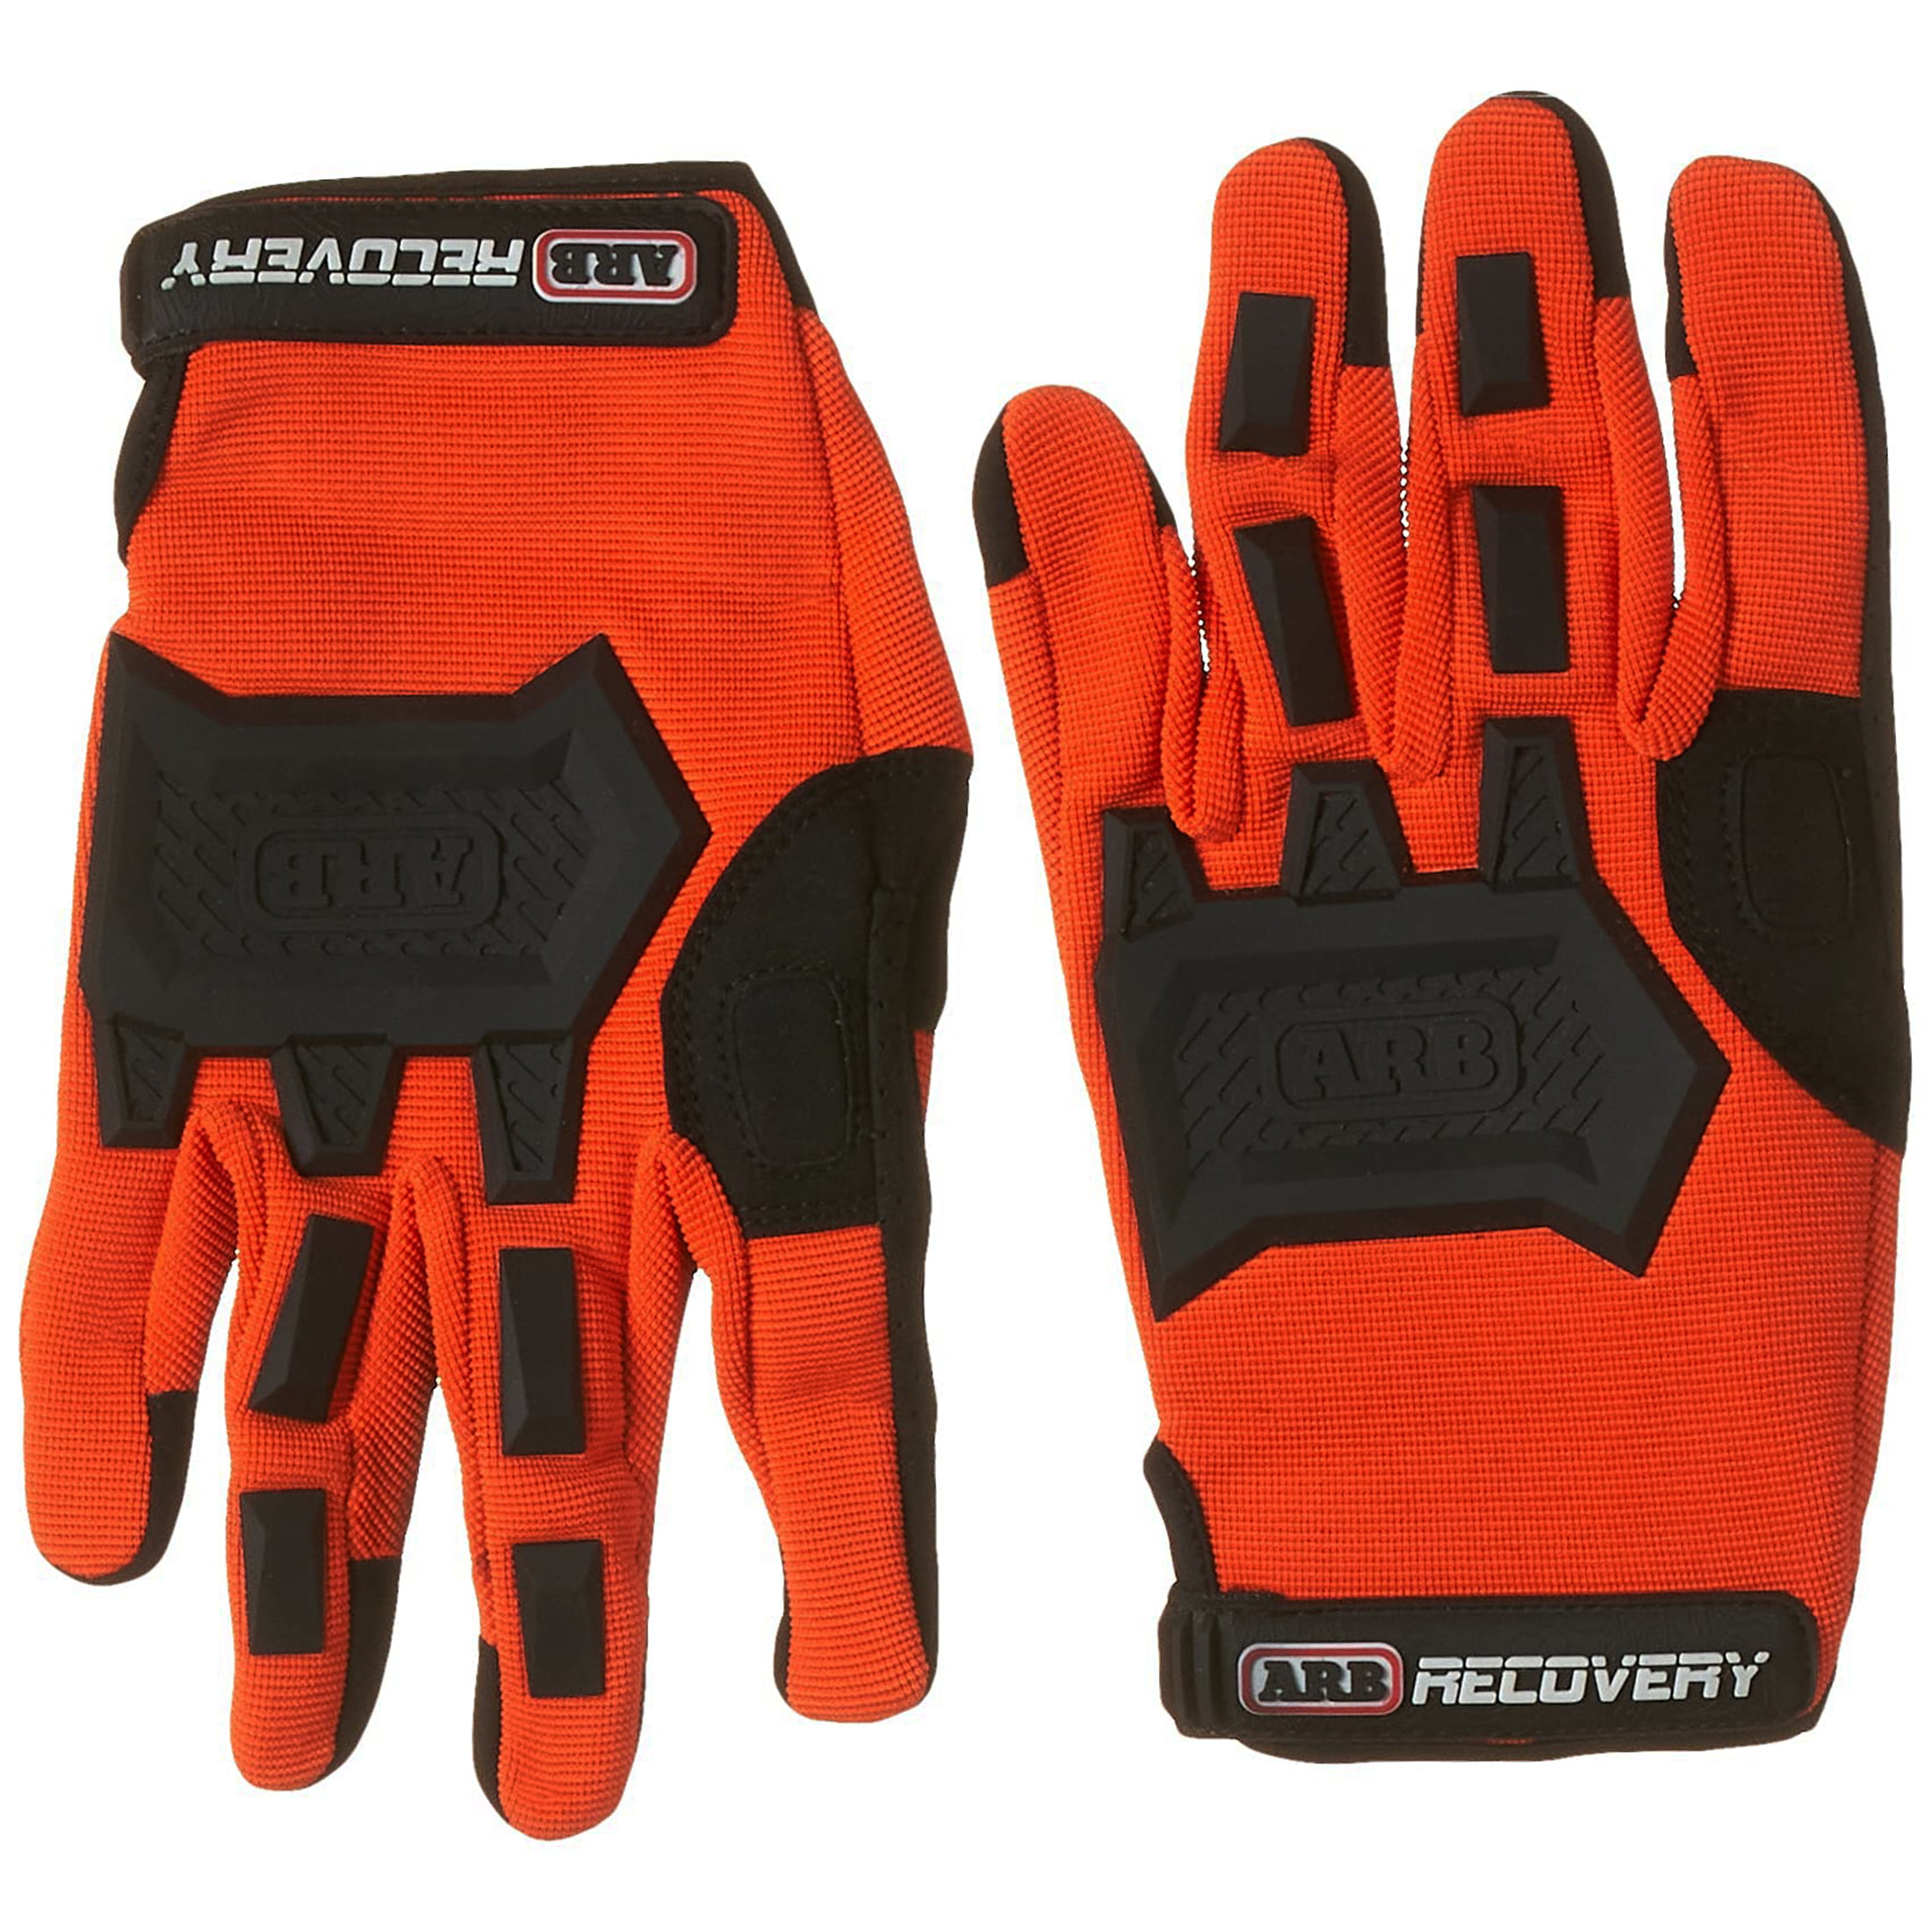 ARB Recovery Winching Gloves GLOVEMX ARB 